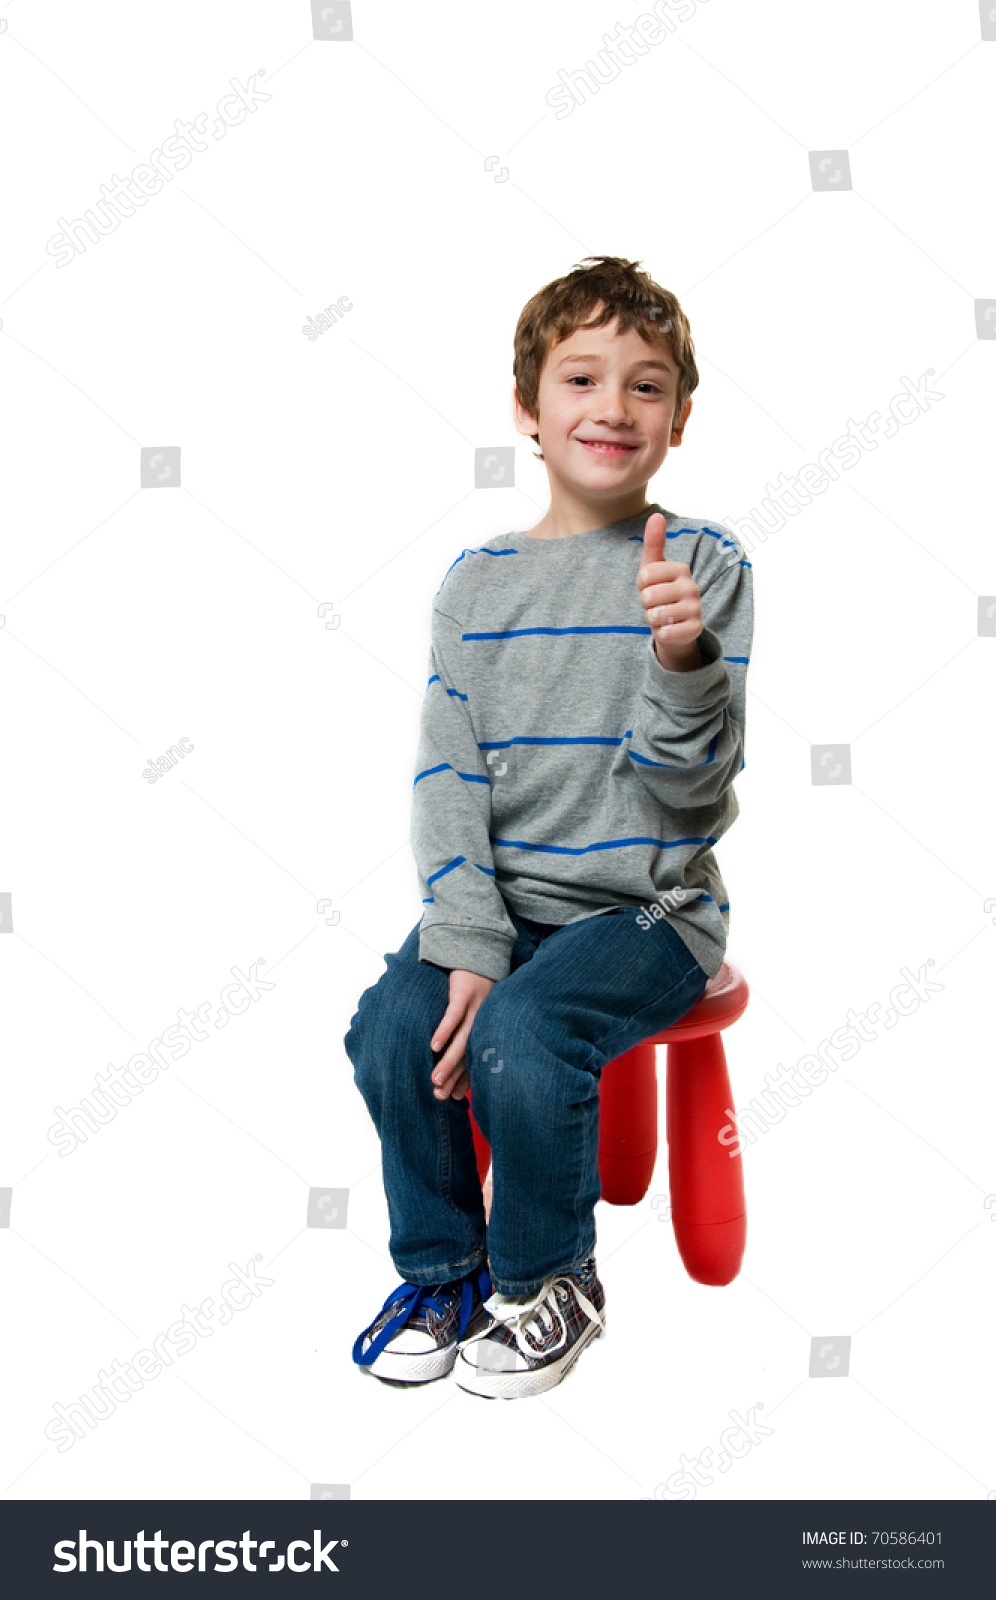 Boy Sitting On A Stool Giving A Thumbs Up Stock Photo 70586401 ...